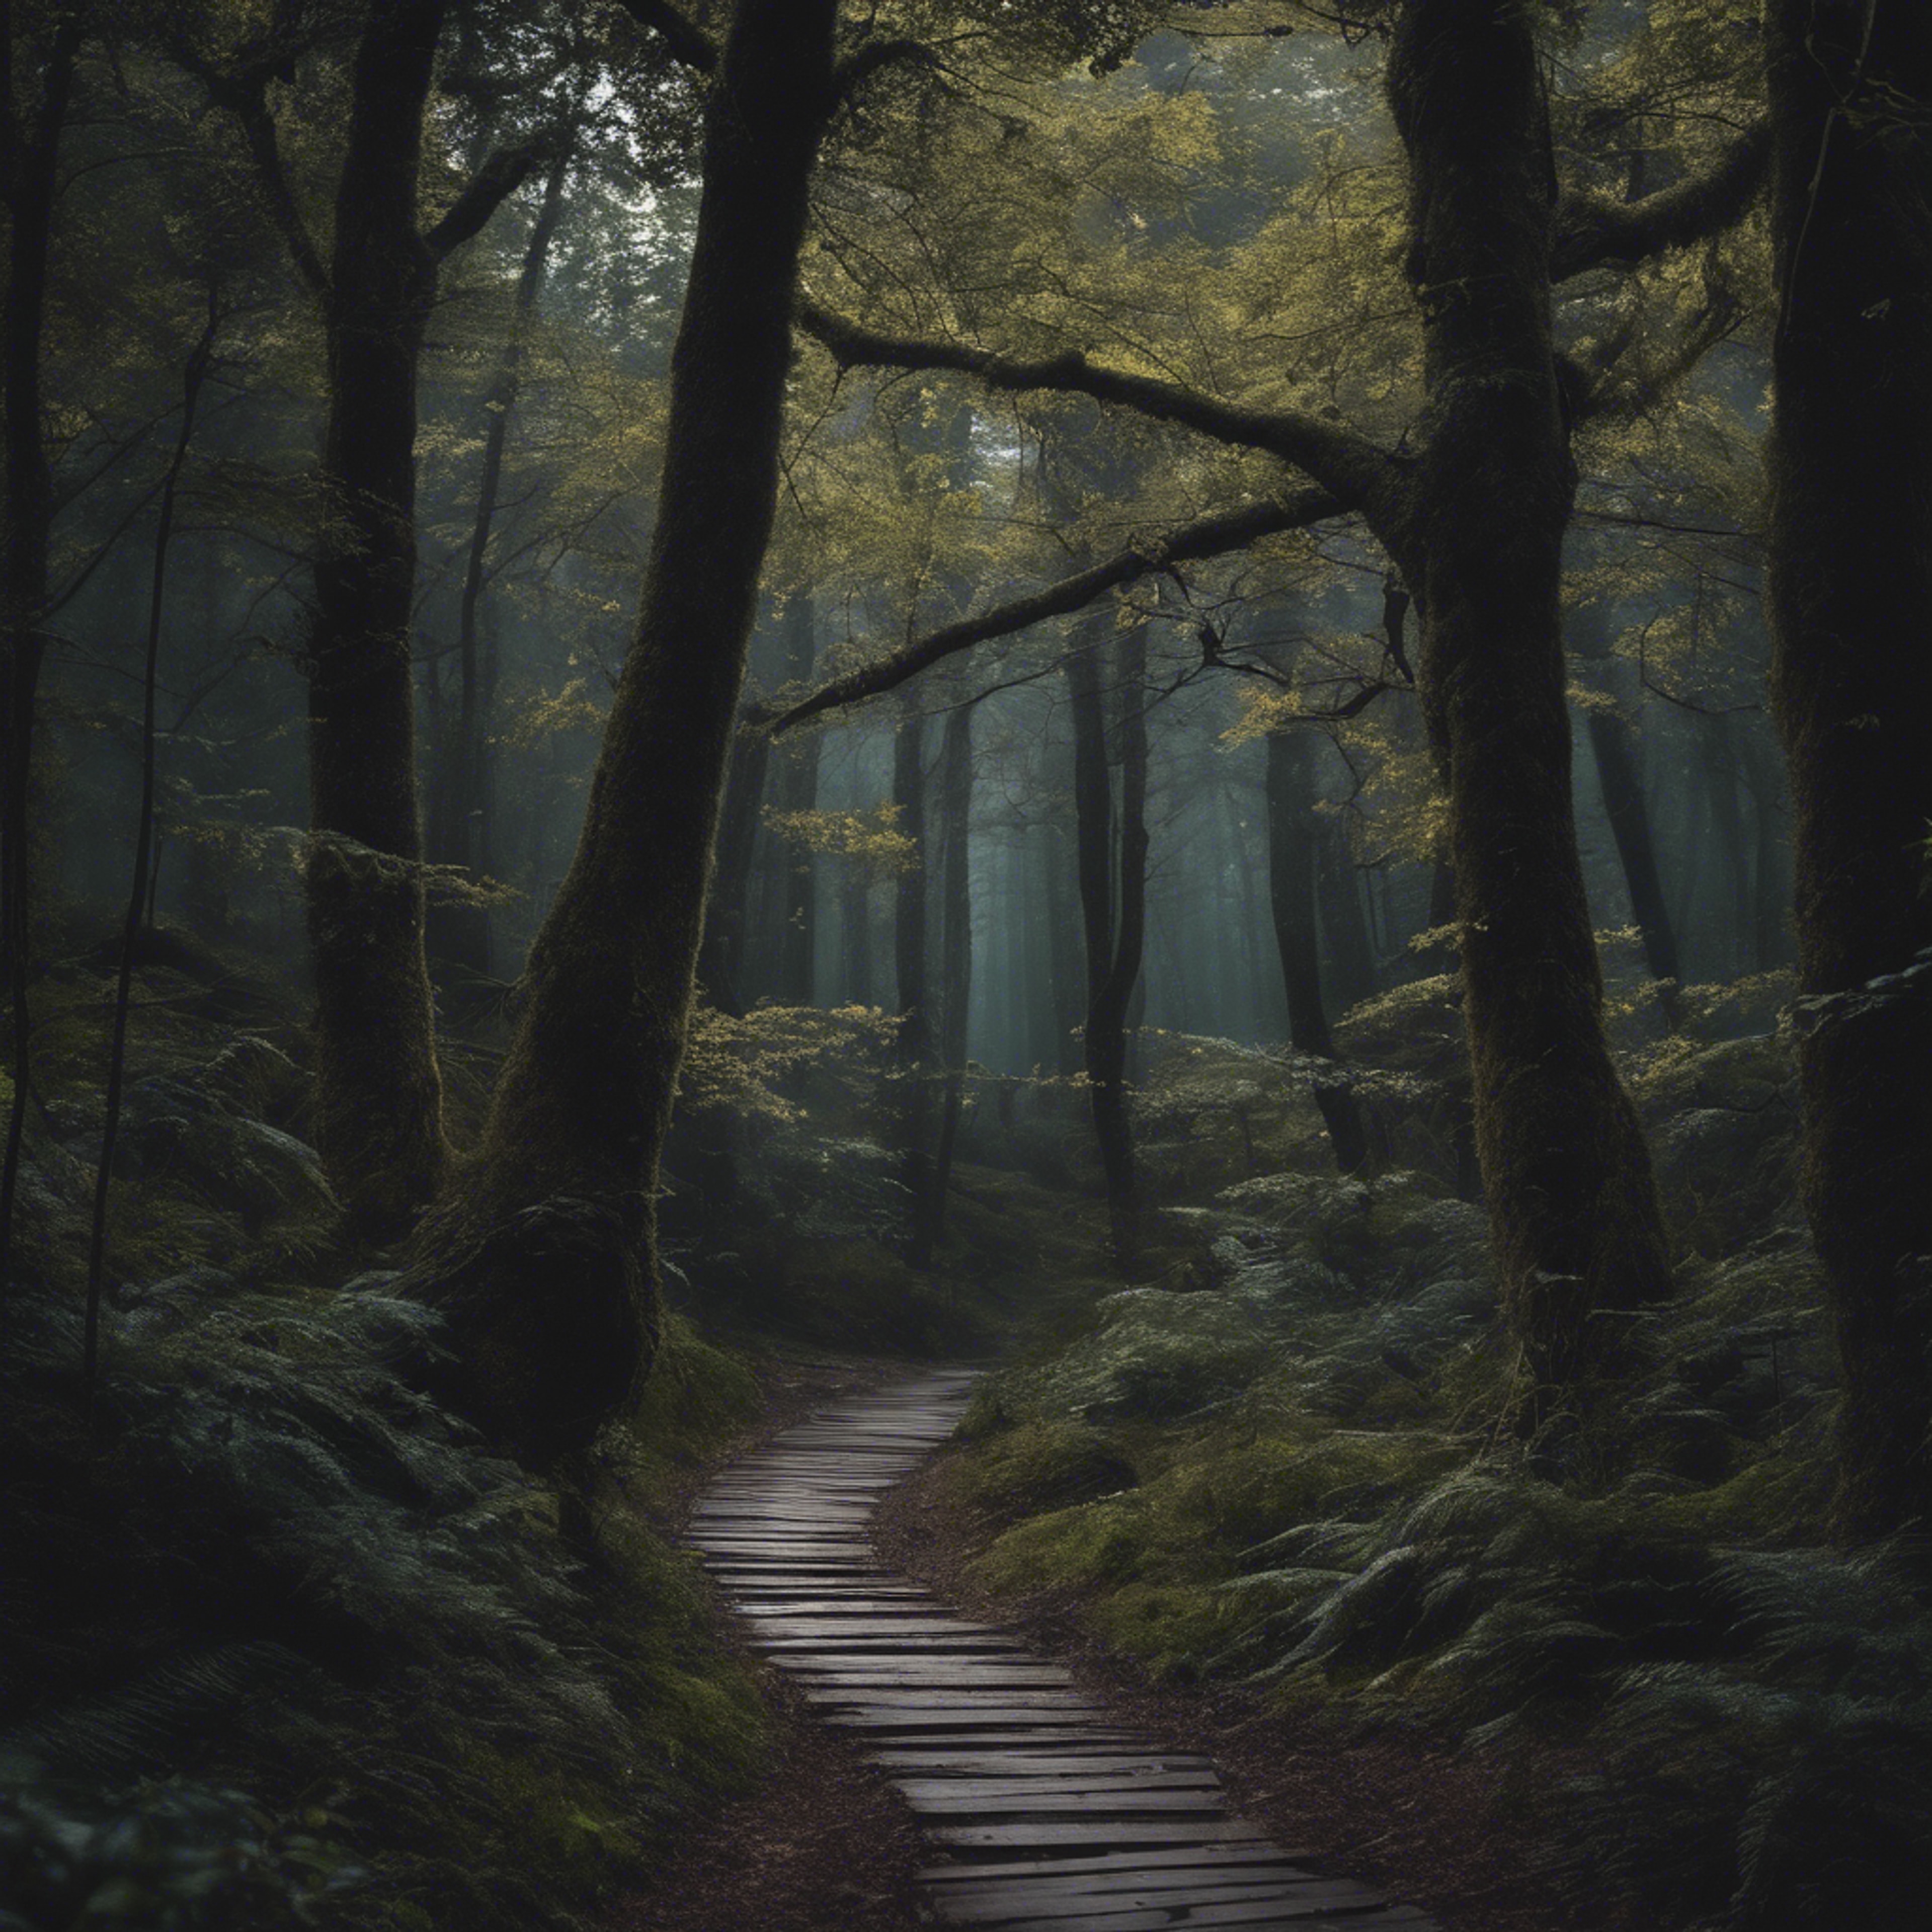 An untraveled path in a dark and mysterious forest Tapeta na zeď[df6a1d860b87482e8c75]